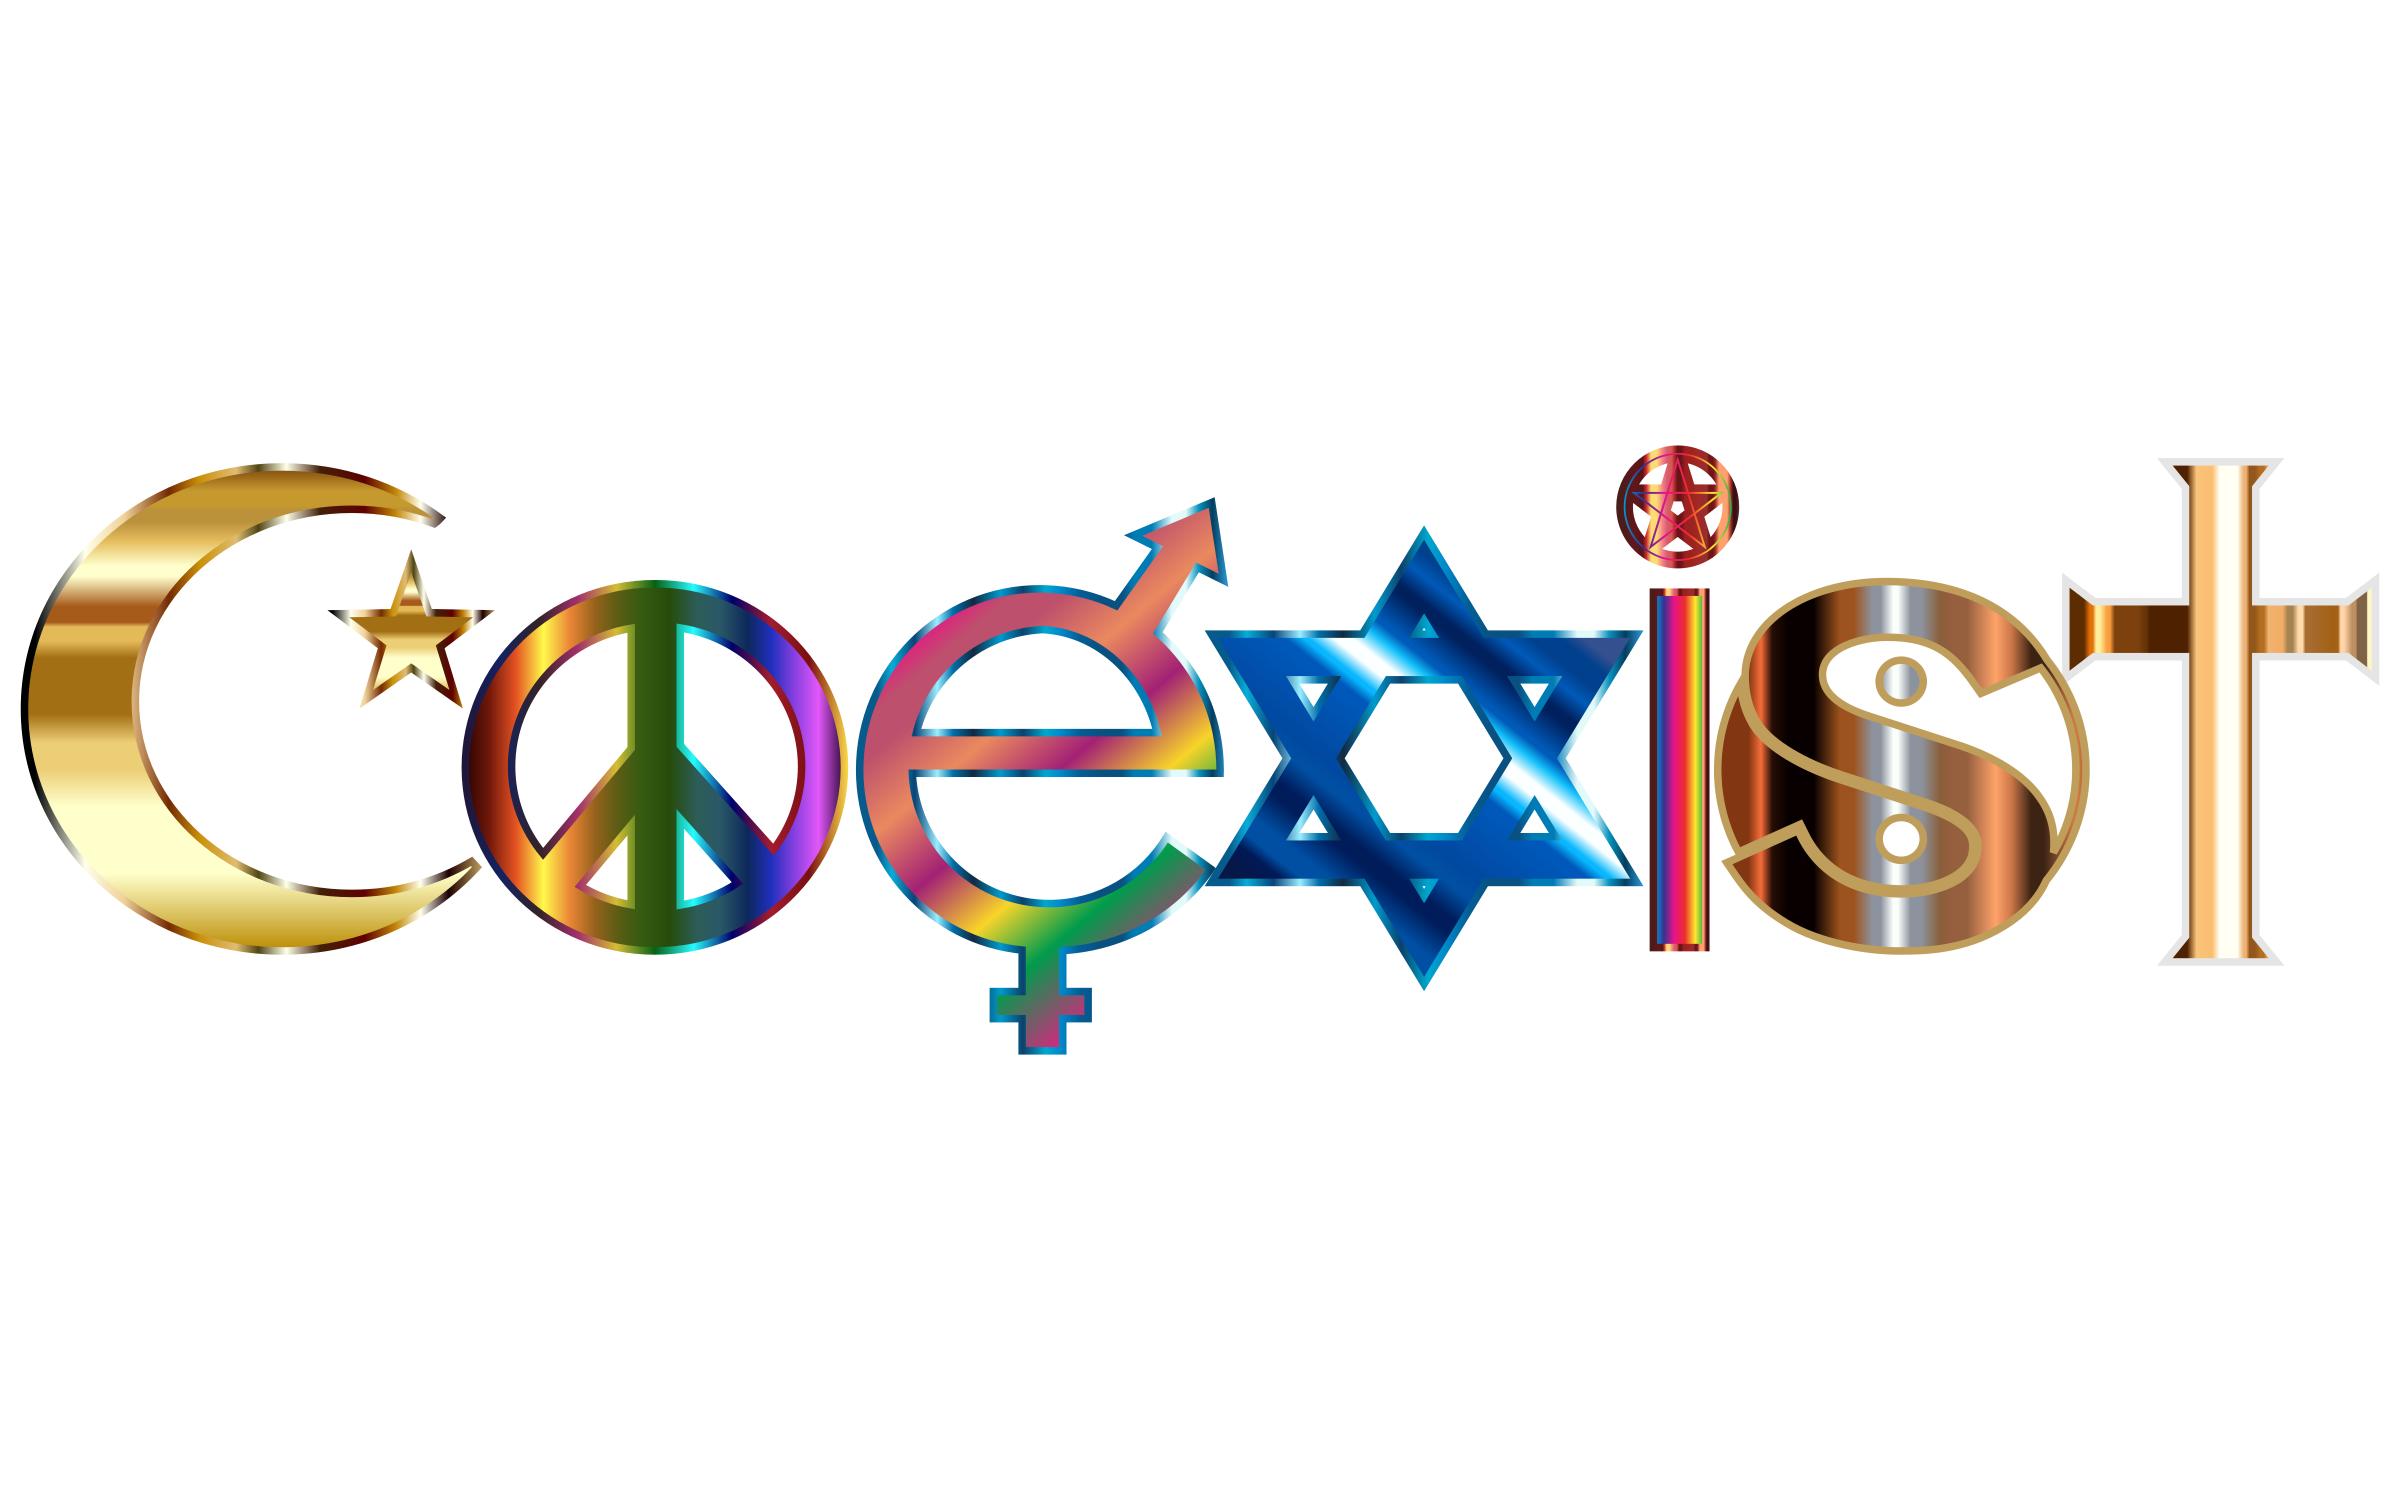 COEXIST Ornate With Stroke png